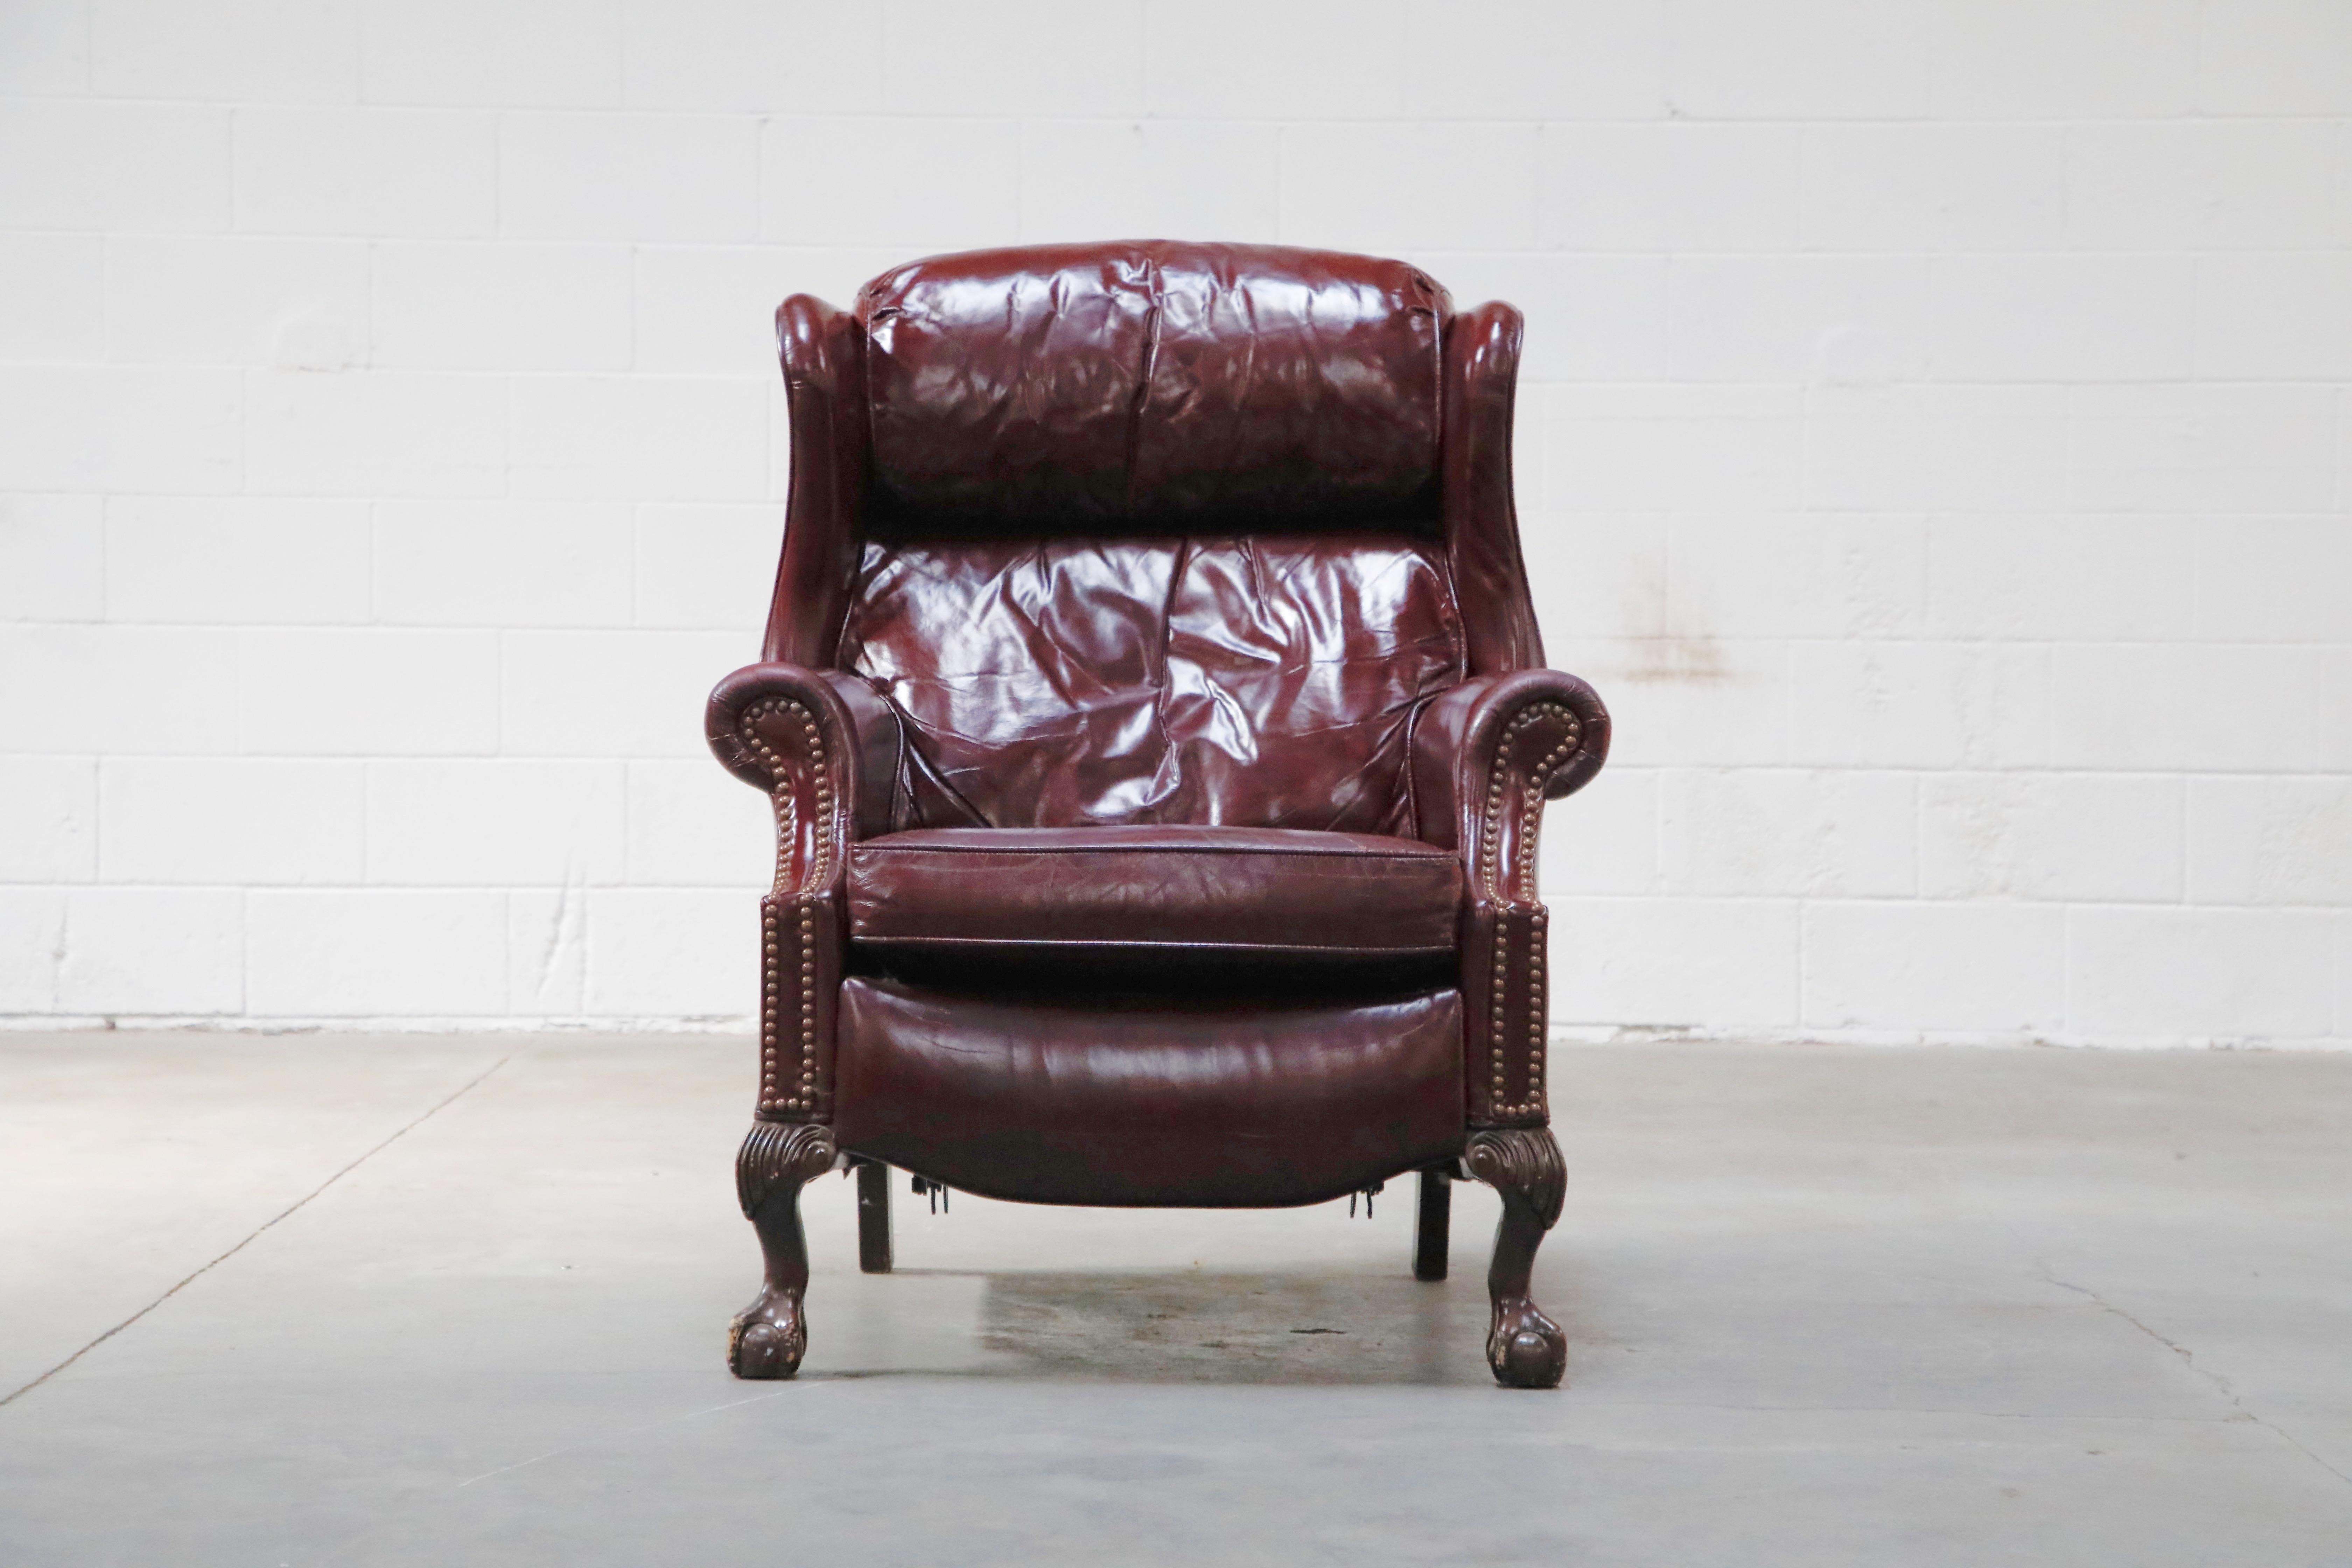 Add a touch of nobility to your space with this reclining Napoleon III style leather wingback fireplace armchair by Bradington Young, a quality manufacturer in North Carolina for over 30 years. This handsome reclining lounge chair is upholstered in